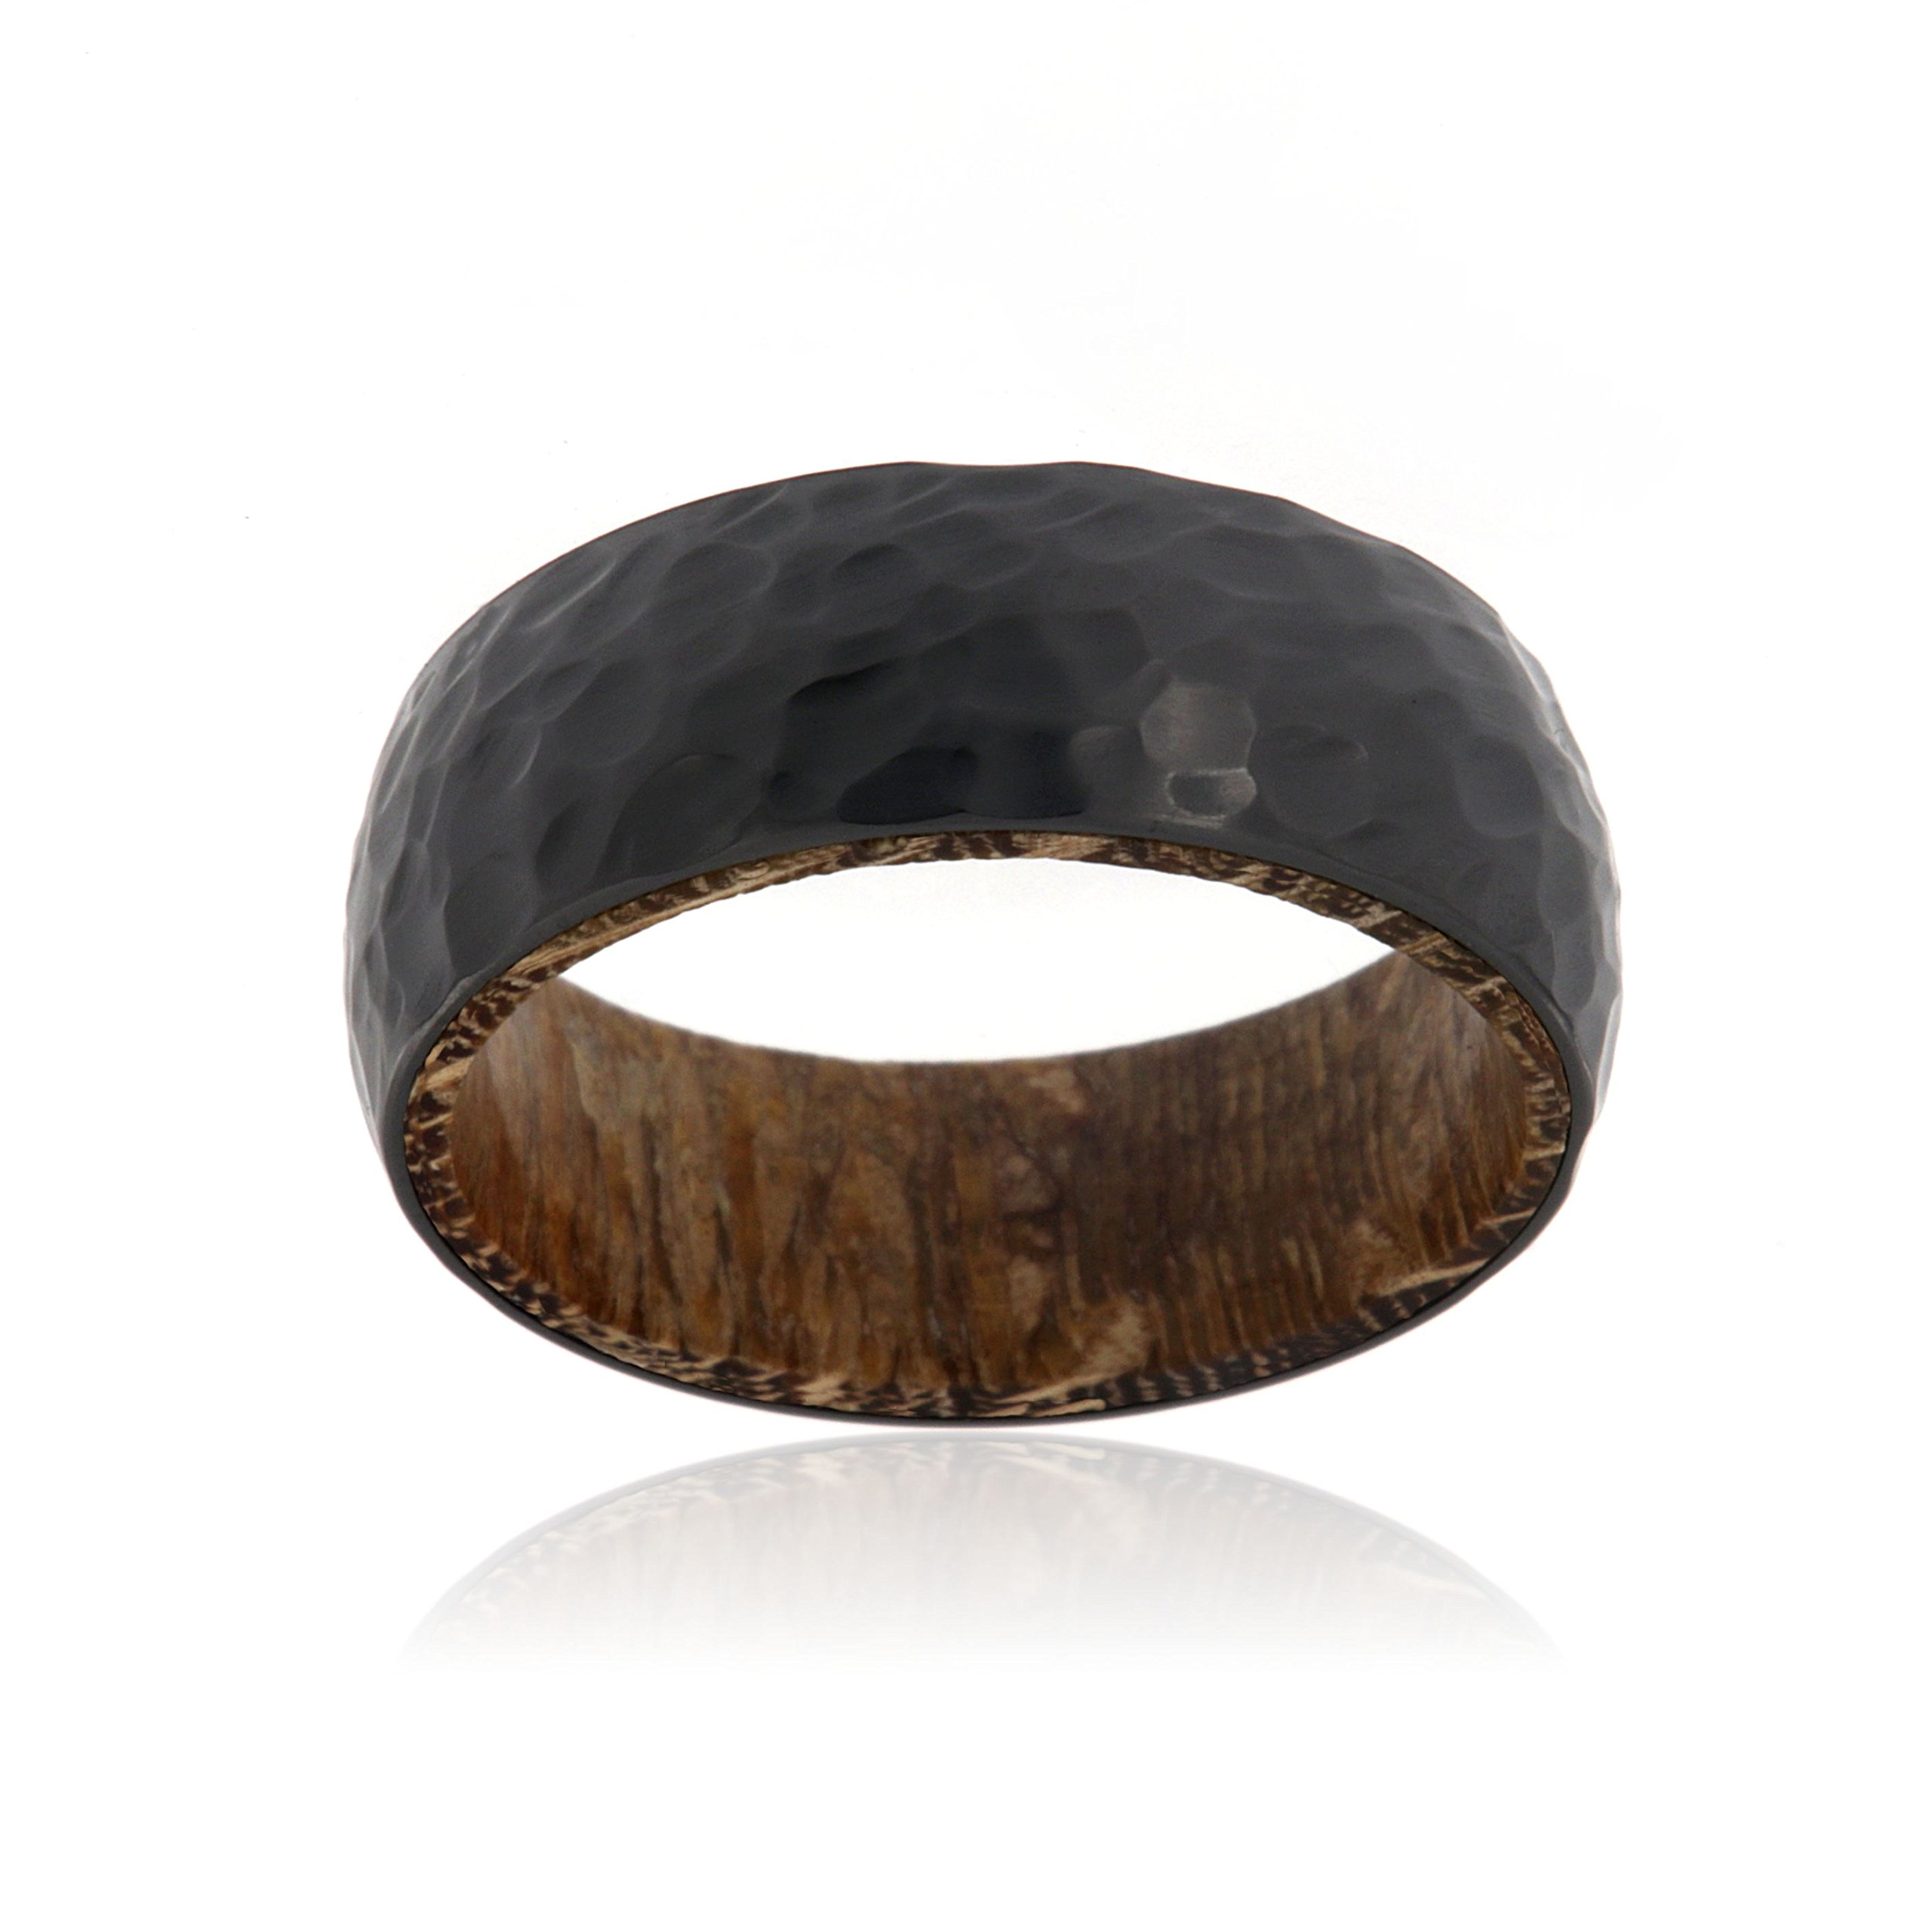 Black Zirconium Ring With Leopard Wood Sleeve And Premium Hammered Finish 8mm Wide Ring - USA Made Custom Jewelry And Bands